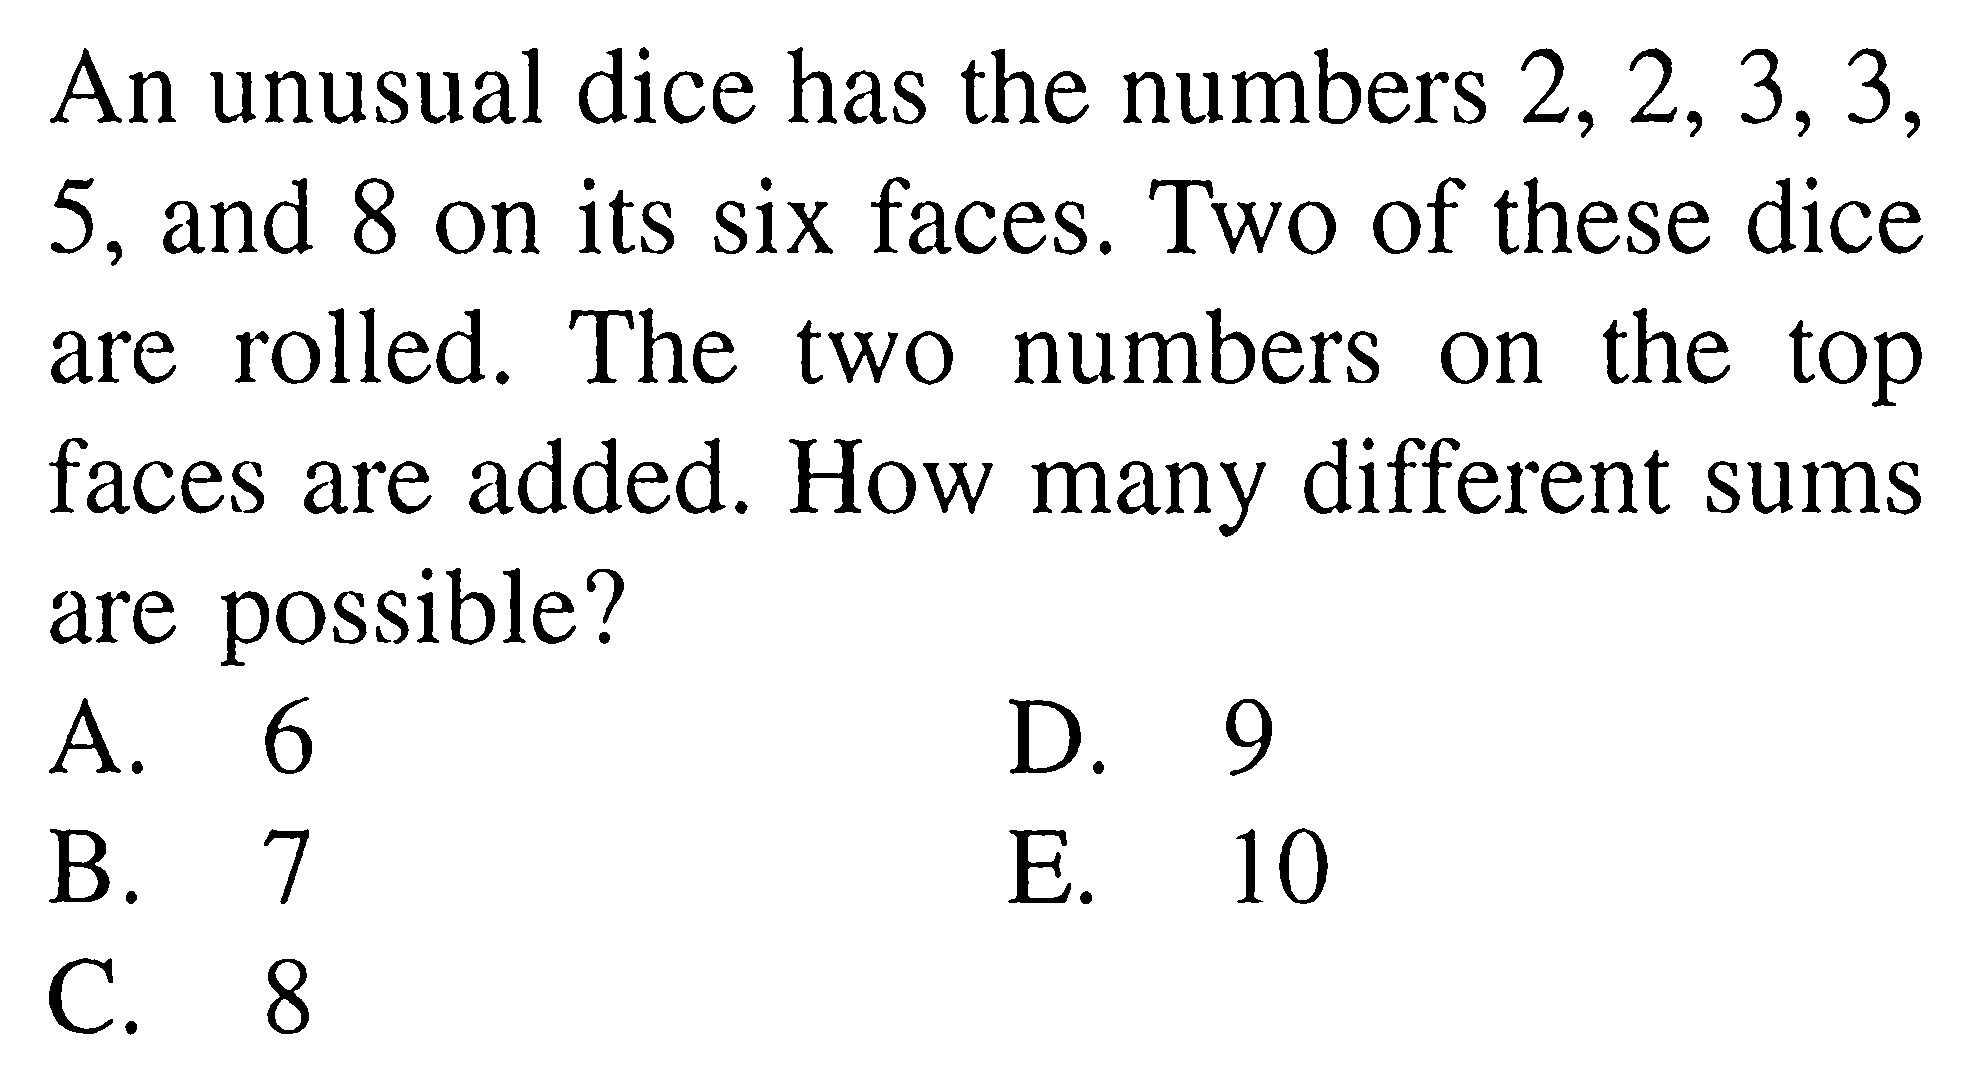 An unusual dice has the numbers 2,2,3,3,5, and 8 on its six faces. Two of these dice are rolled. The two numbers on the top faces are added. How many different sums are possible?